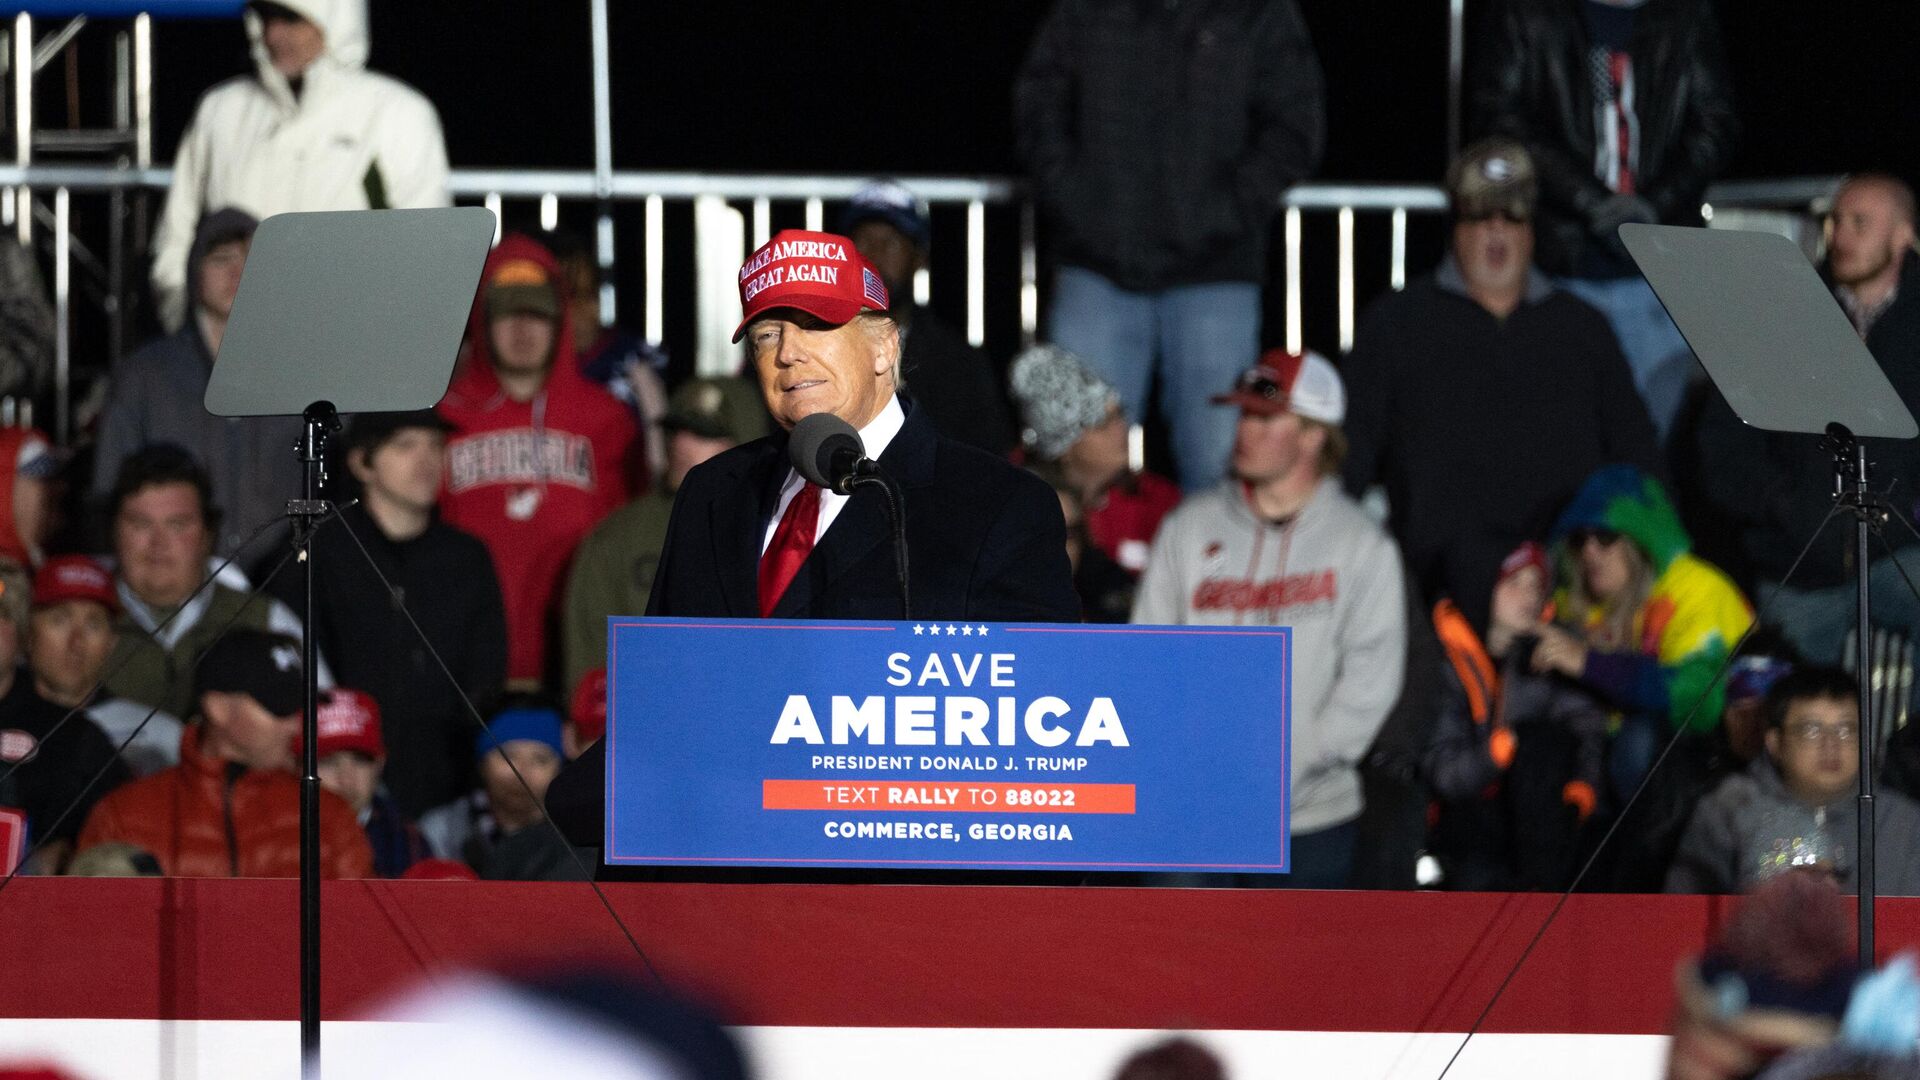  Former U.S. President Donald Trump speaks during a rally at the Banks County Dragway on March 26, 2022 in Commerce, Georgia - Sputnik International, 1920, 27.03.2022